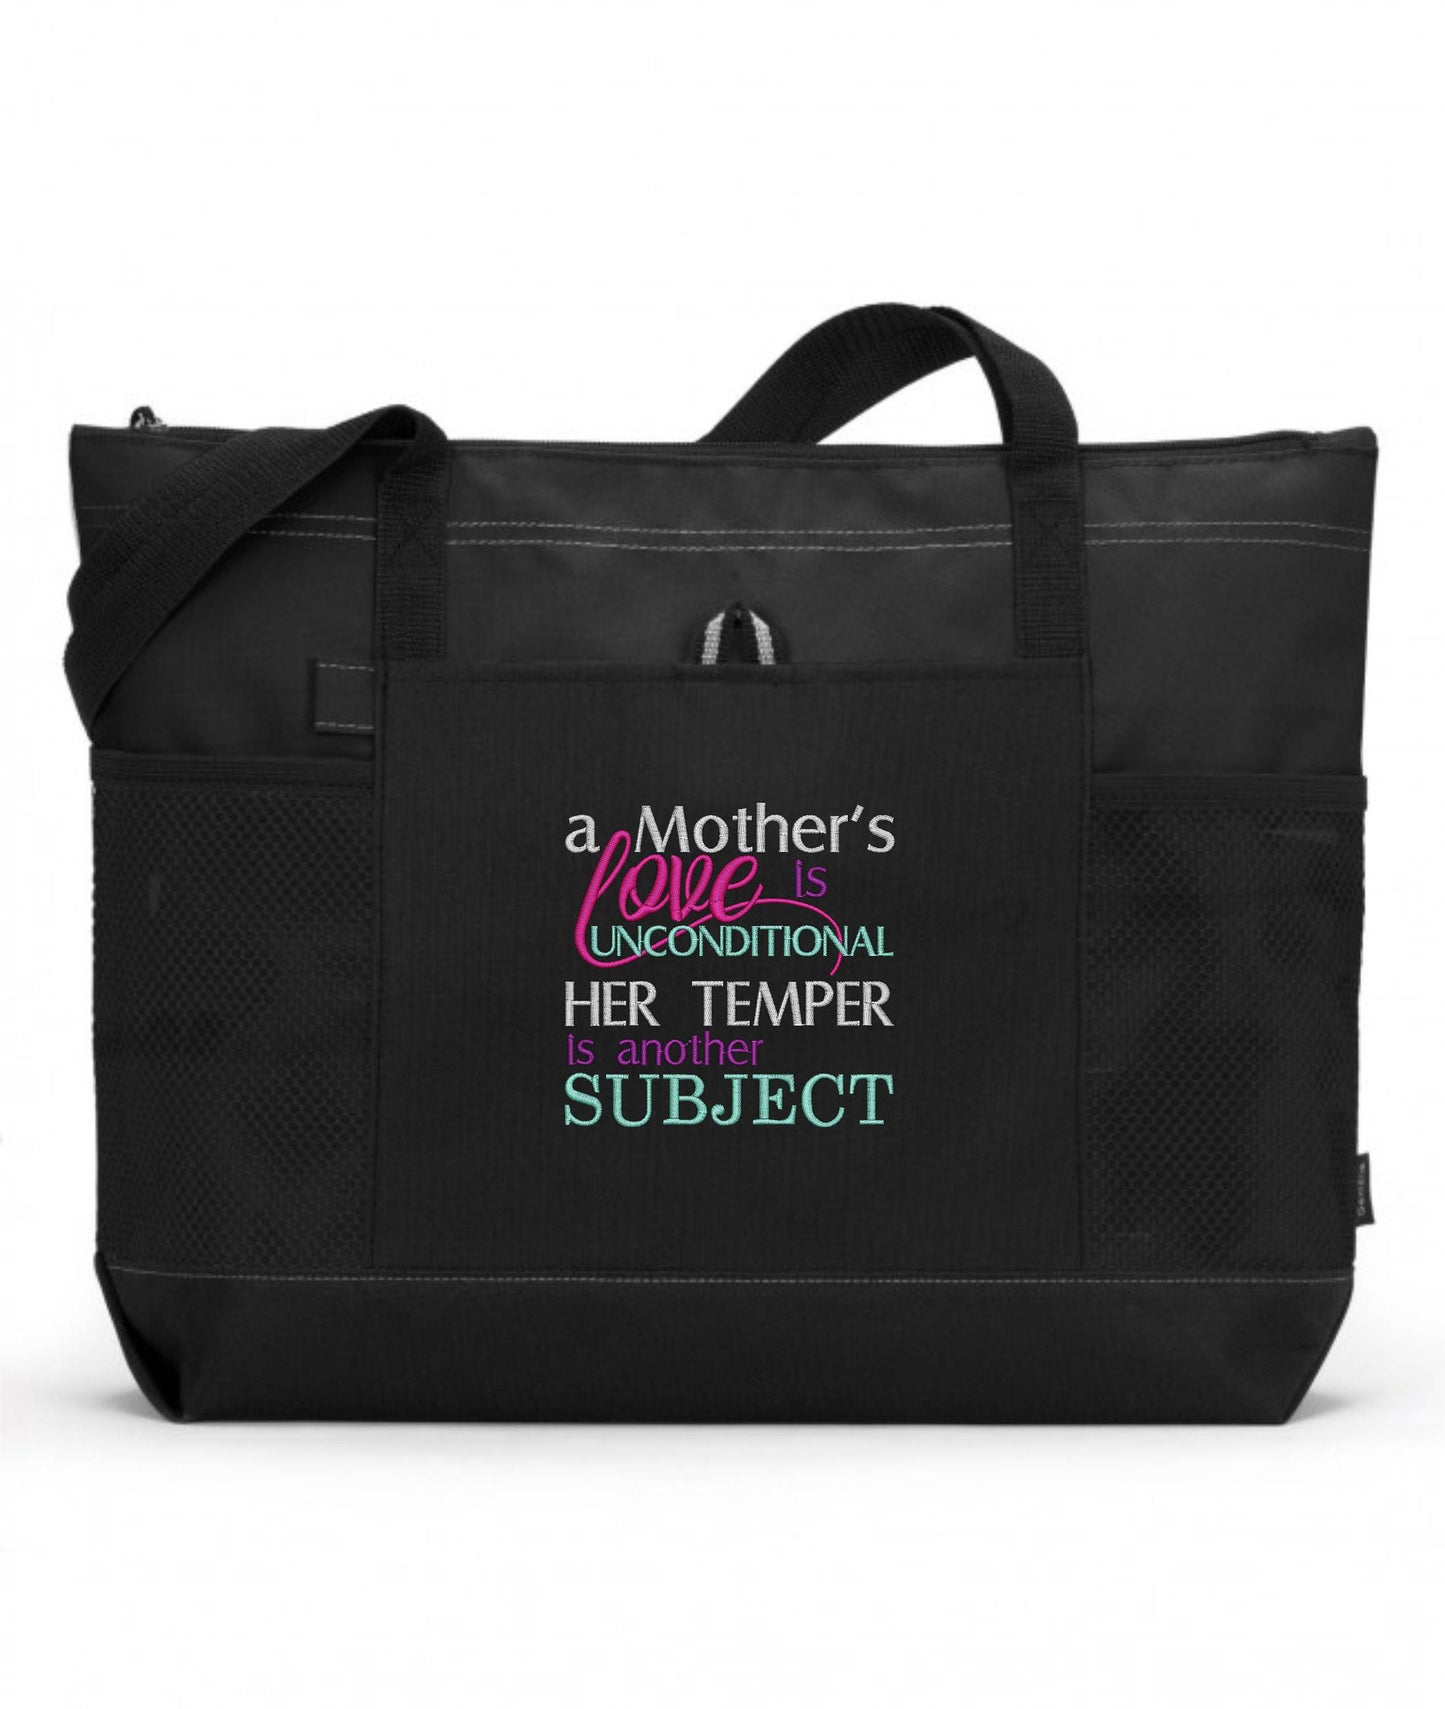 A Mother's Love Is Unconditional Her Temper Is Another Story Embroidered Tote Bag